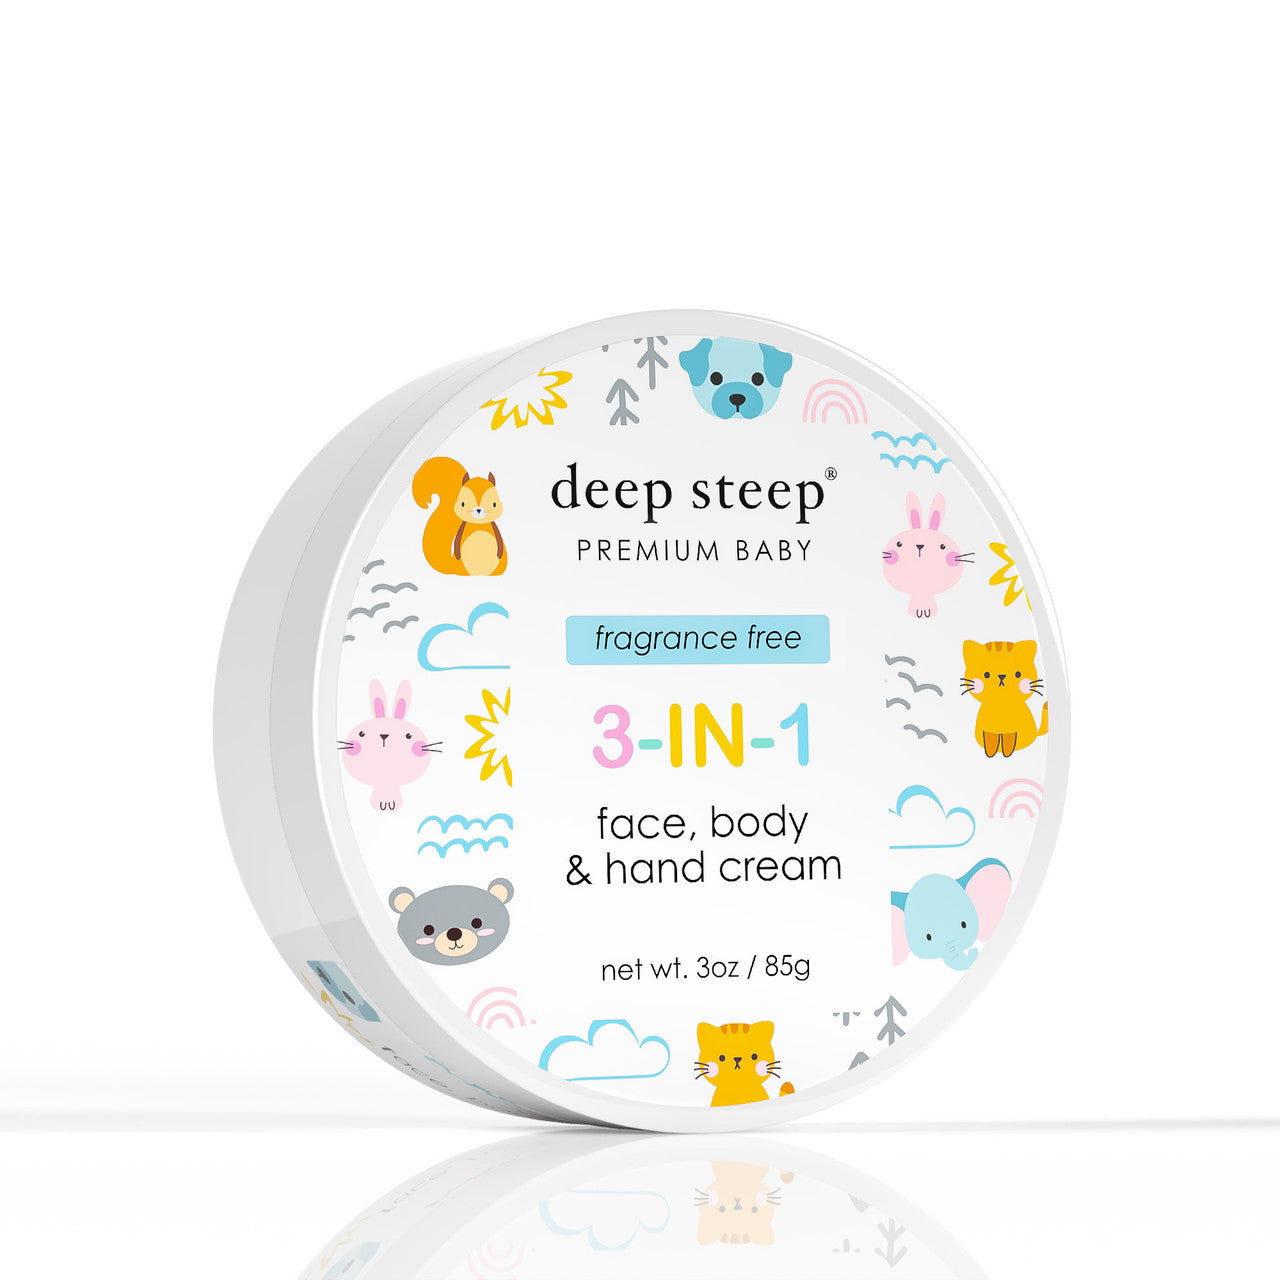 deep steep 3 in 1 Face, Body, Hand Cream for baby